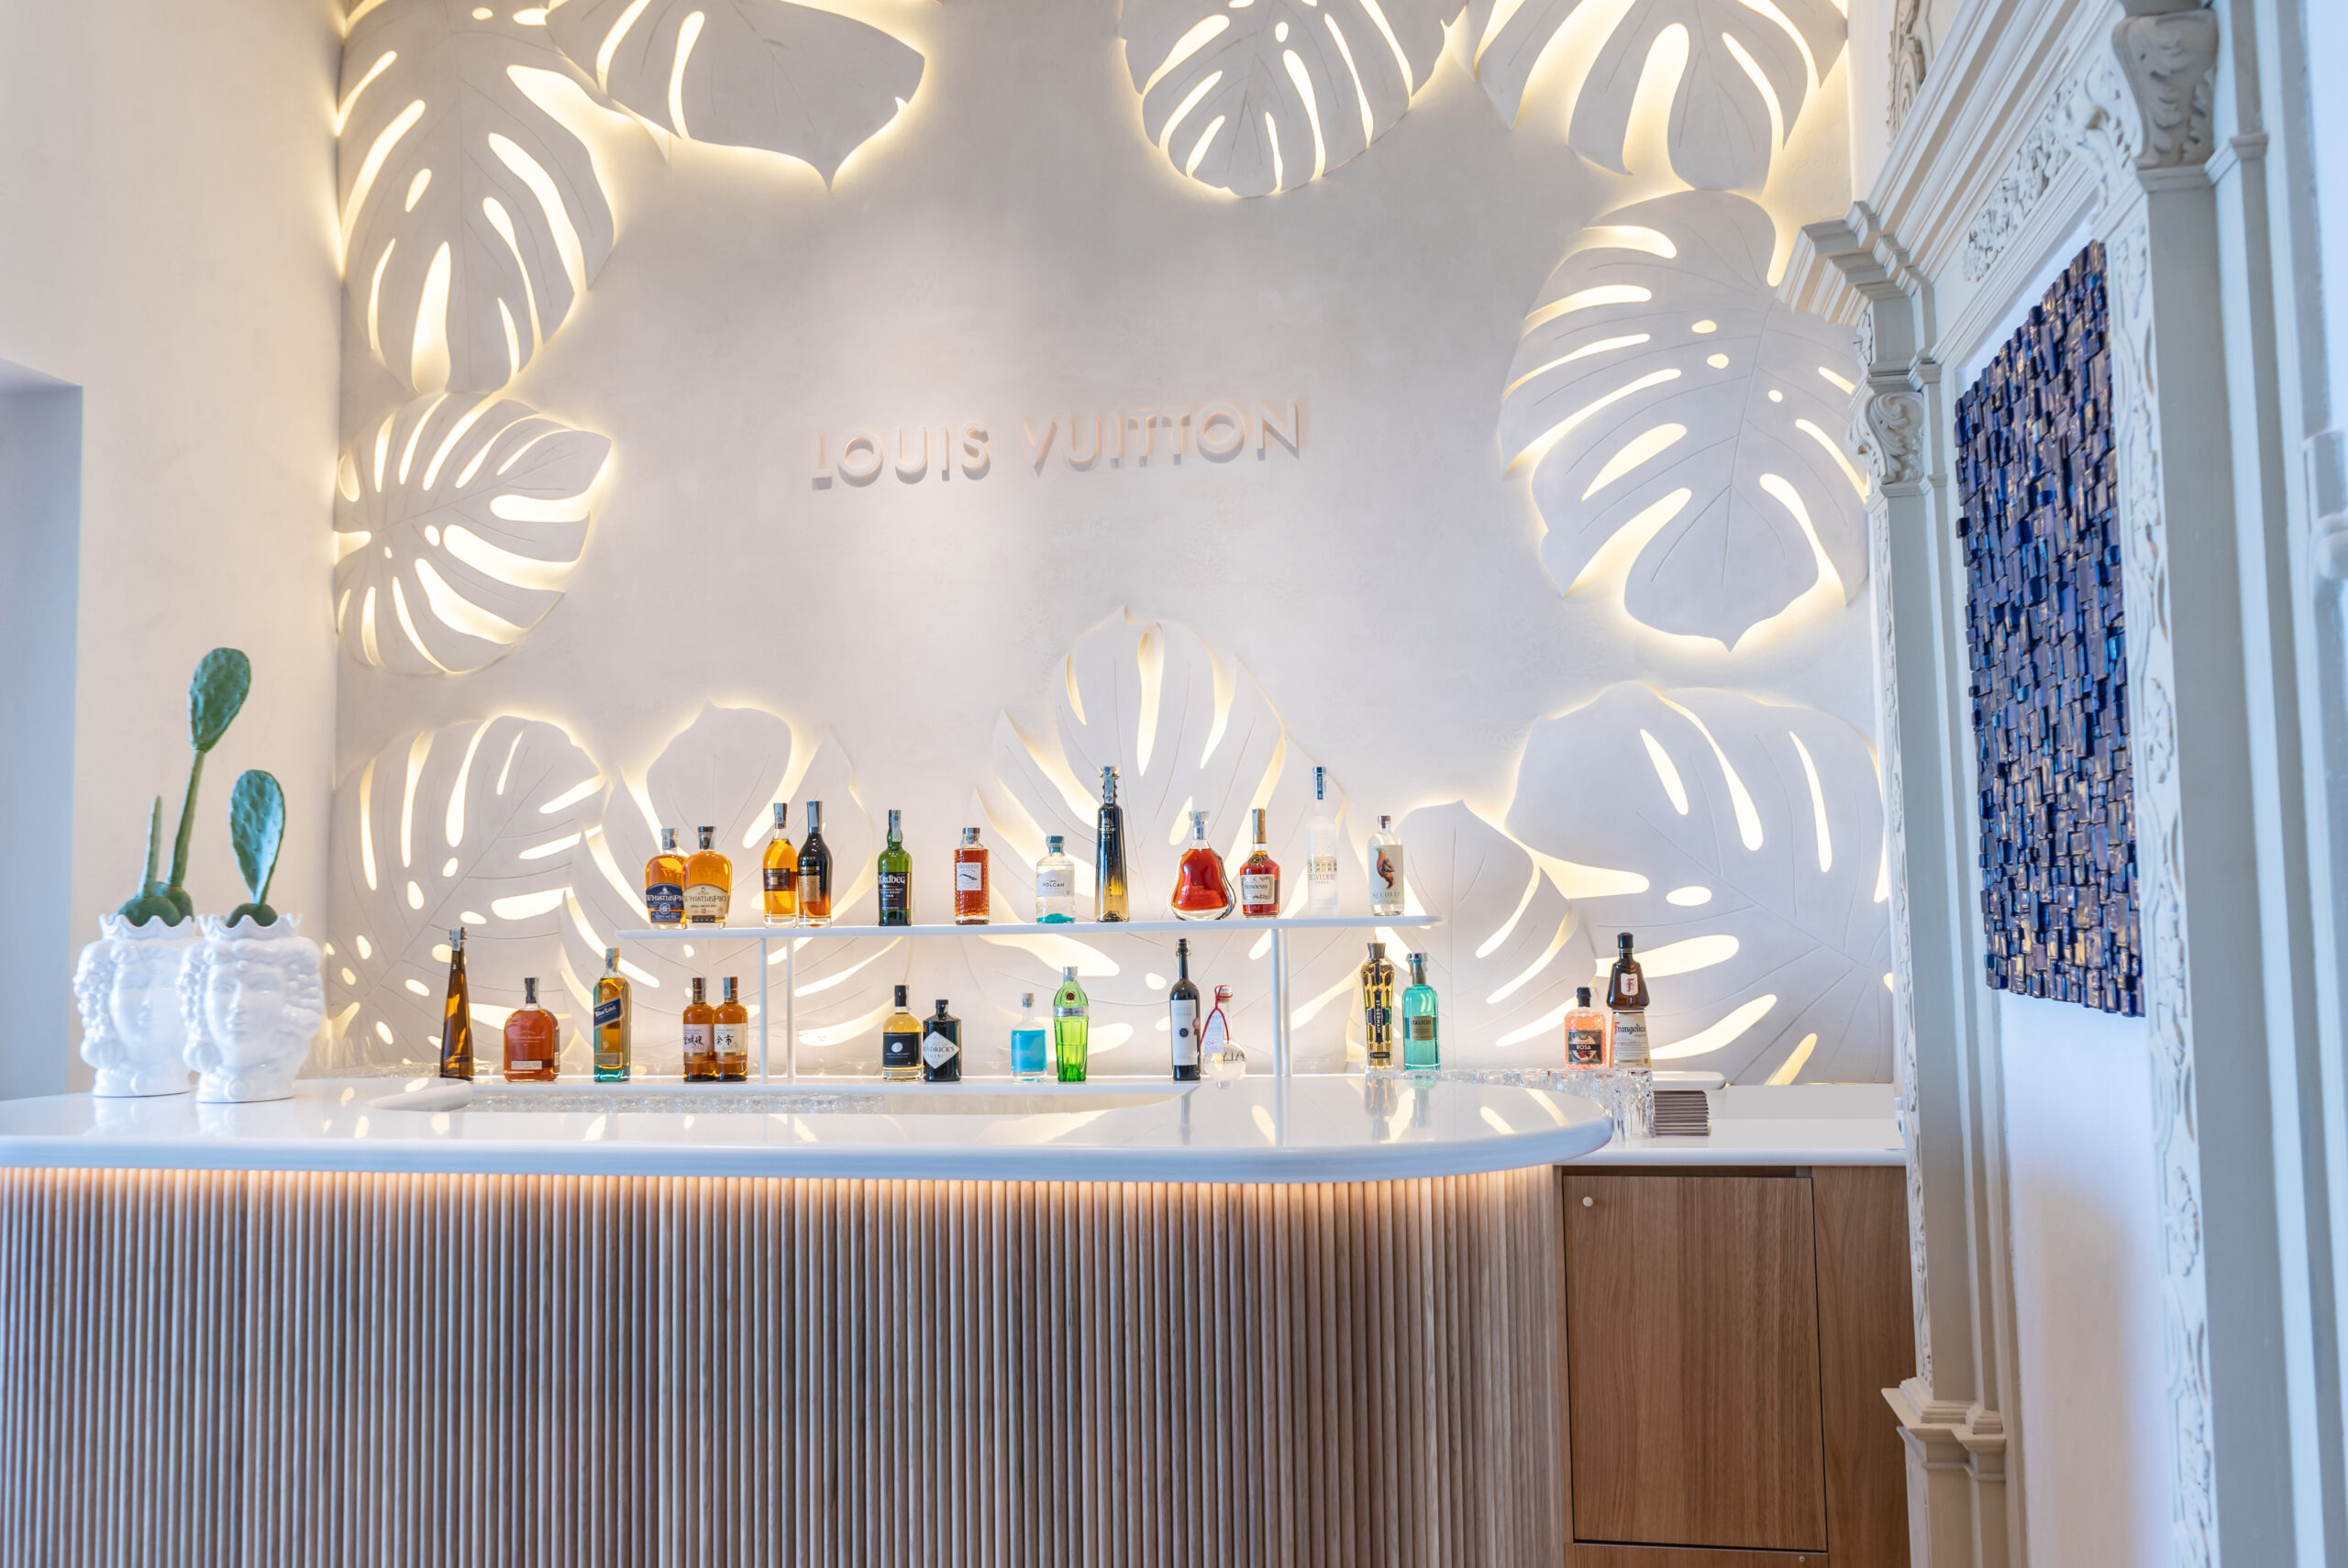 The first Louis Vuitton Café by Timeo and the new store in